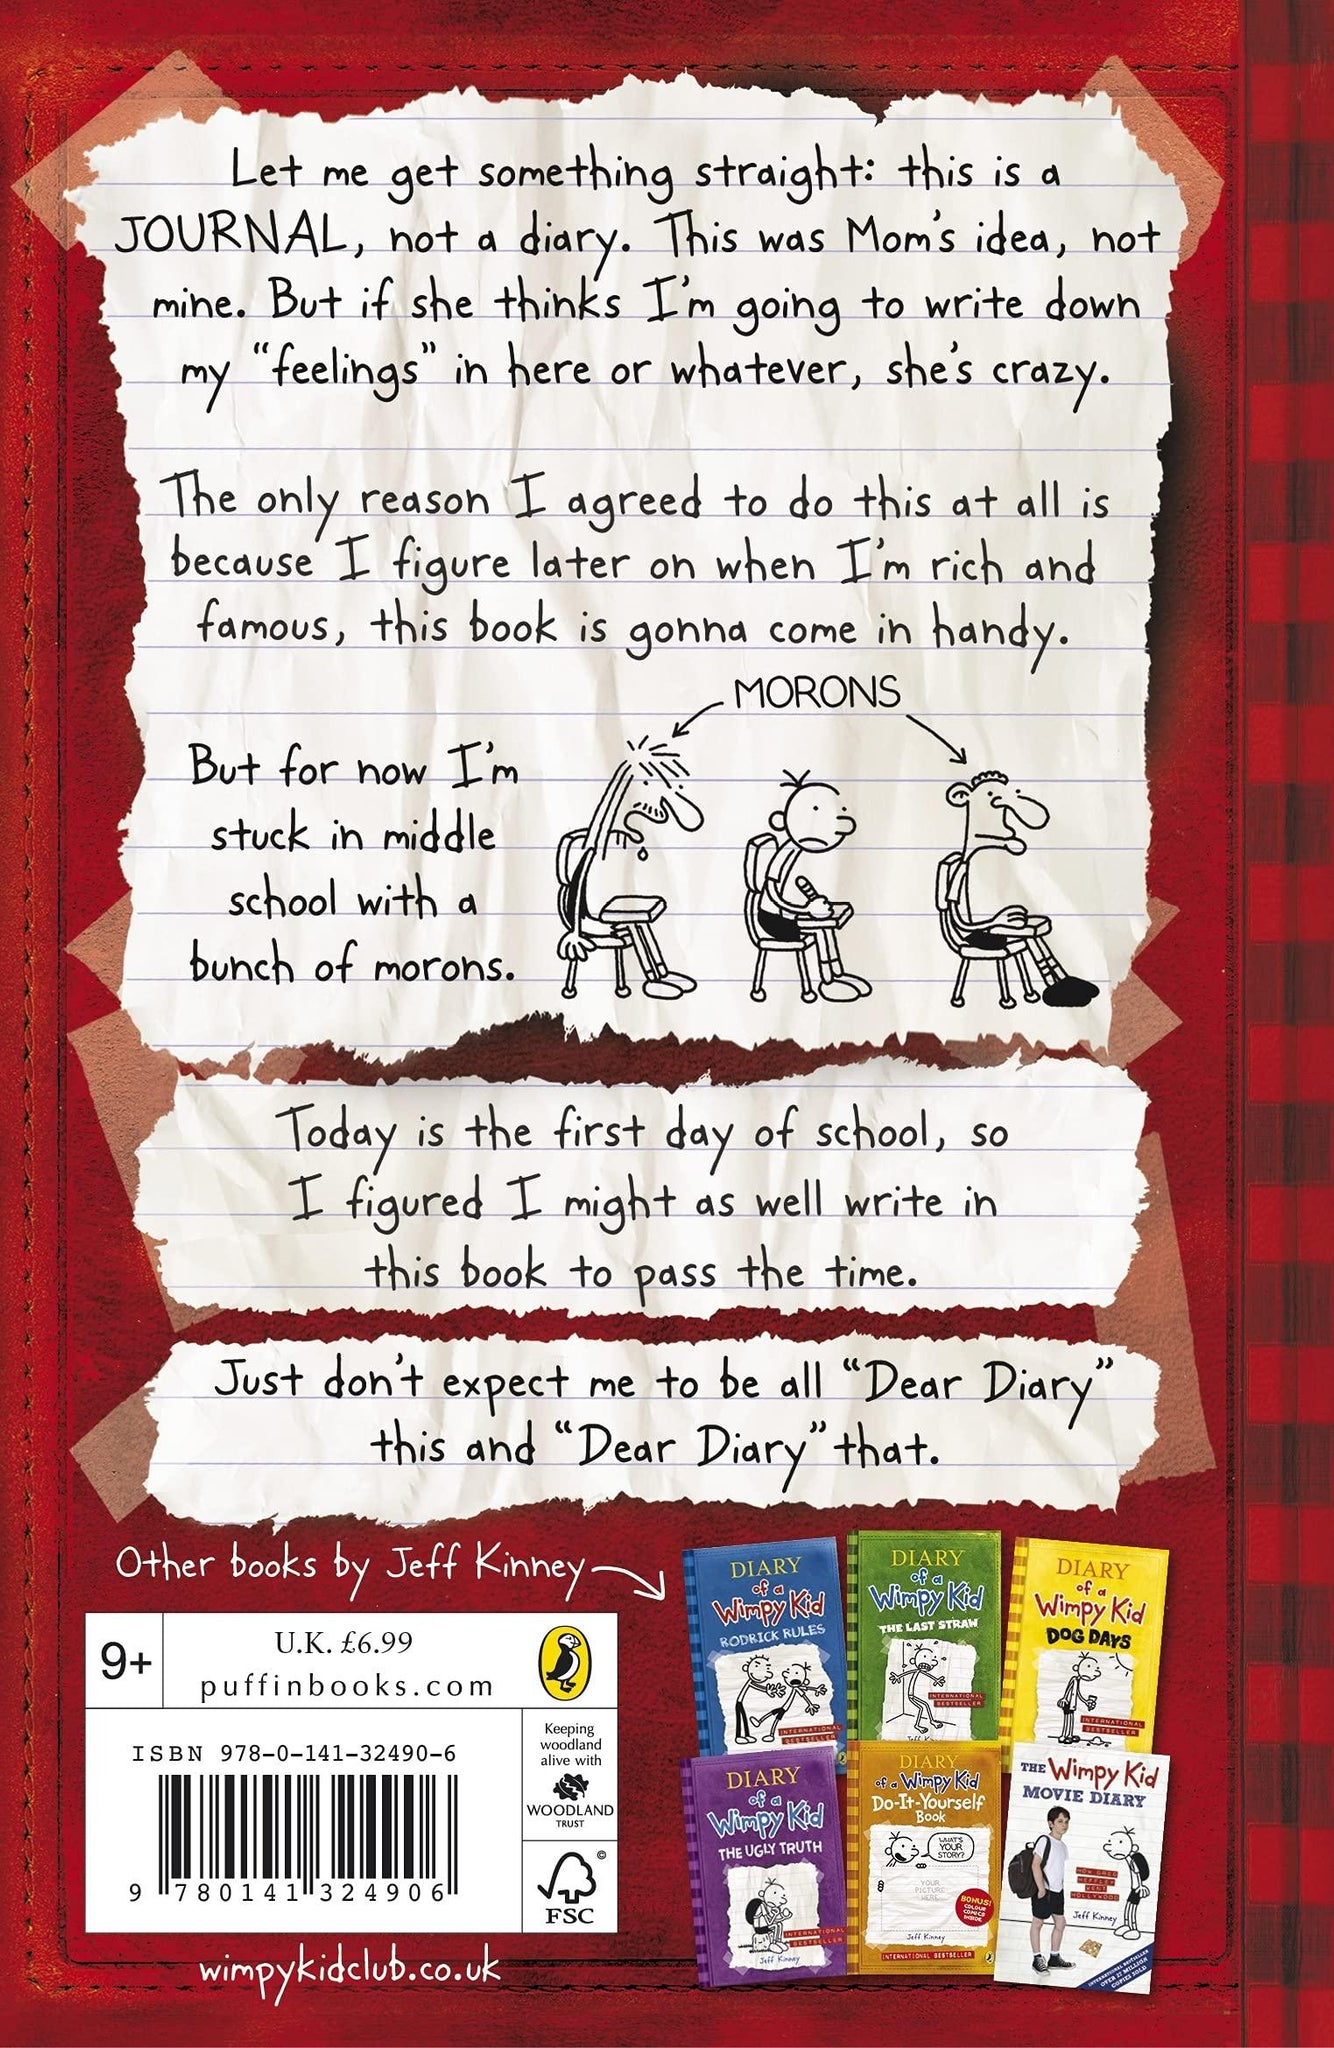 Diary of a Wimpy Kid: No Brainer (Hardcover Book Pre-Order) + $5 Target  Gift Card